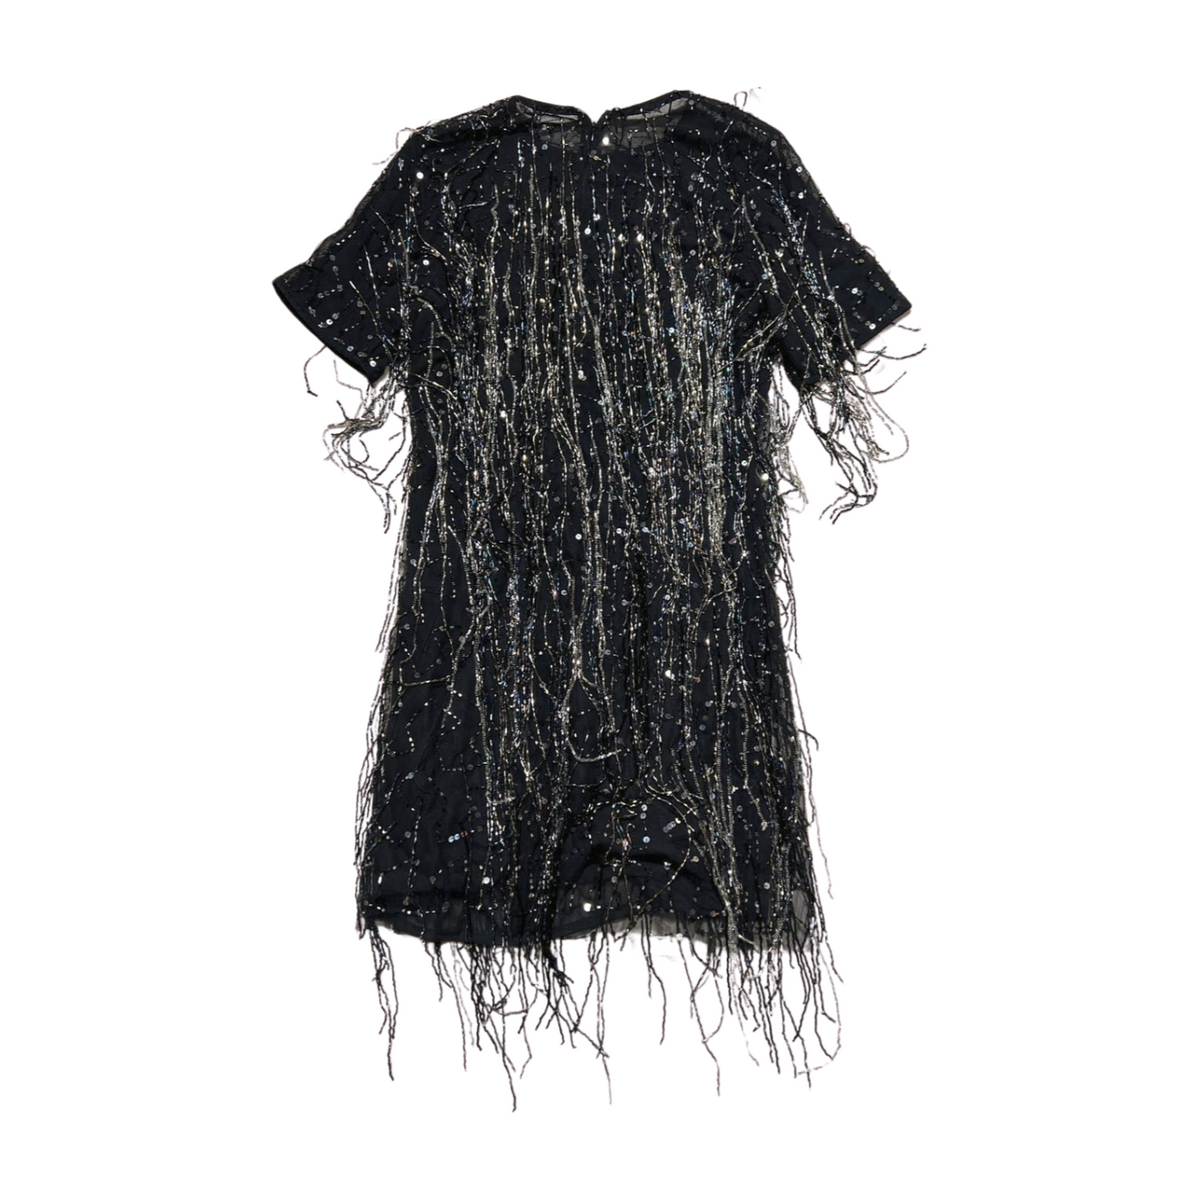 Nasty Gal- Black Beaded "Shift" Mini Dress NEW WITH TAGS!